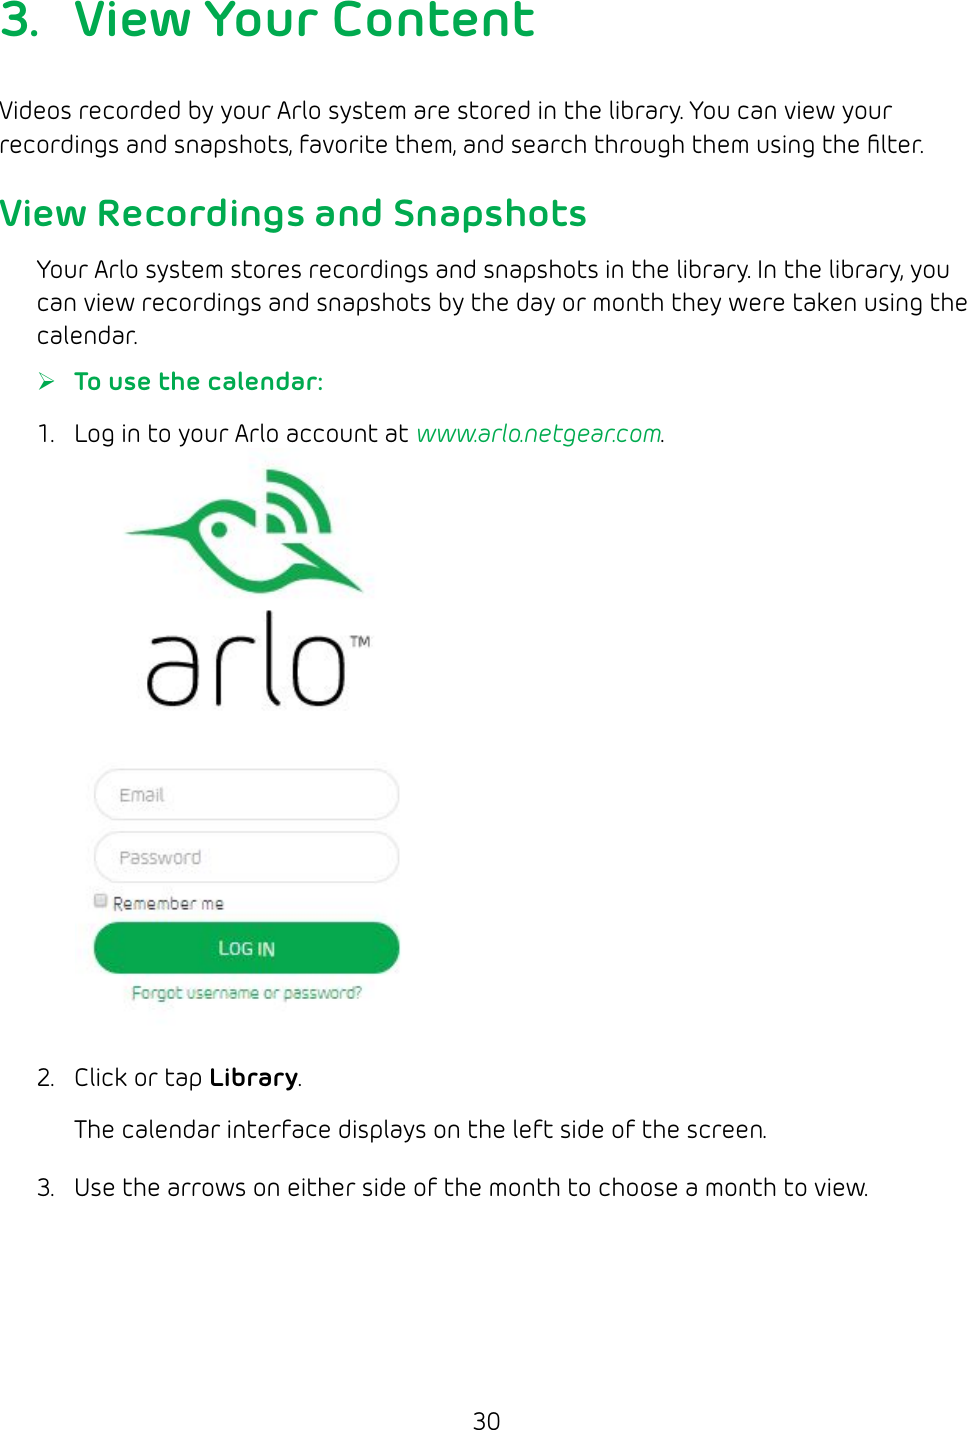 303.  View Your ContentVideos recorded by your Arlo system are stored in the library. You can view your recordings and snapshots, favorite them, and search through them using the ﬁlter.View Recordings and SnapshotsYour Arlo system stores recordings and snapshots in the library. In the library, you can view recordings and snapshots by the day or month they were taken using the calendar.  ¾To use the calendar:1.  Log in to your Arlo account at www.arlo.netgear.com.2.  Click or tap Library.The calendar interface displays on the left side of the screen.3.  Use the arrows on either side of the month to choose a month to view.